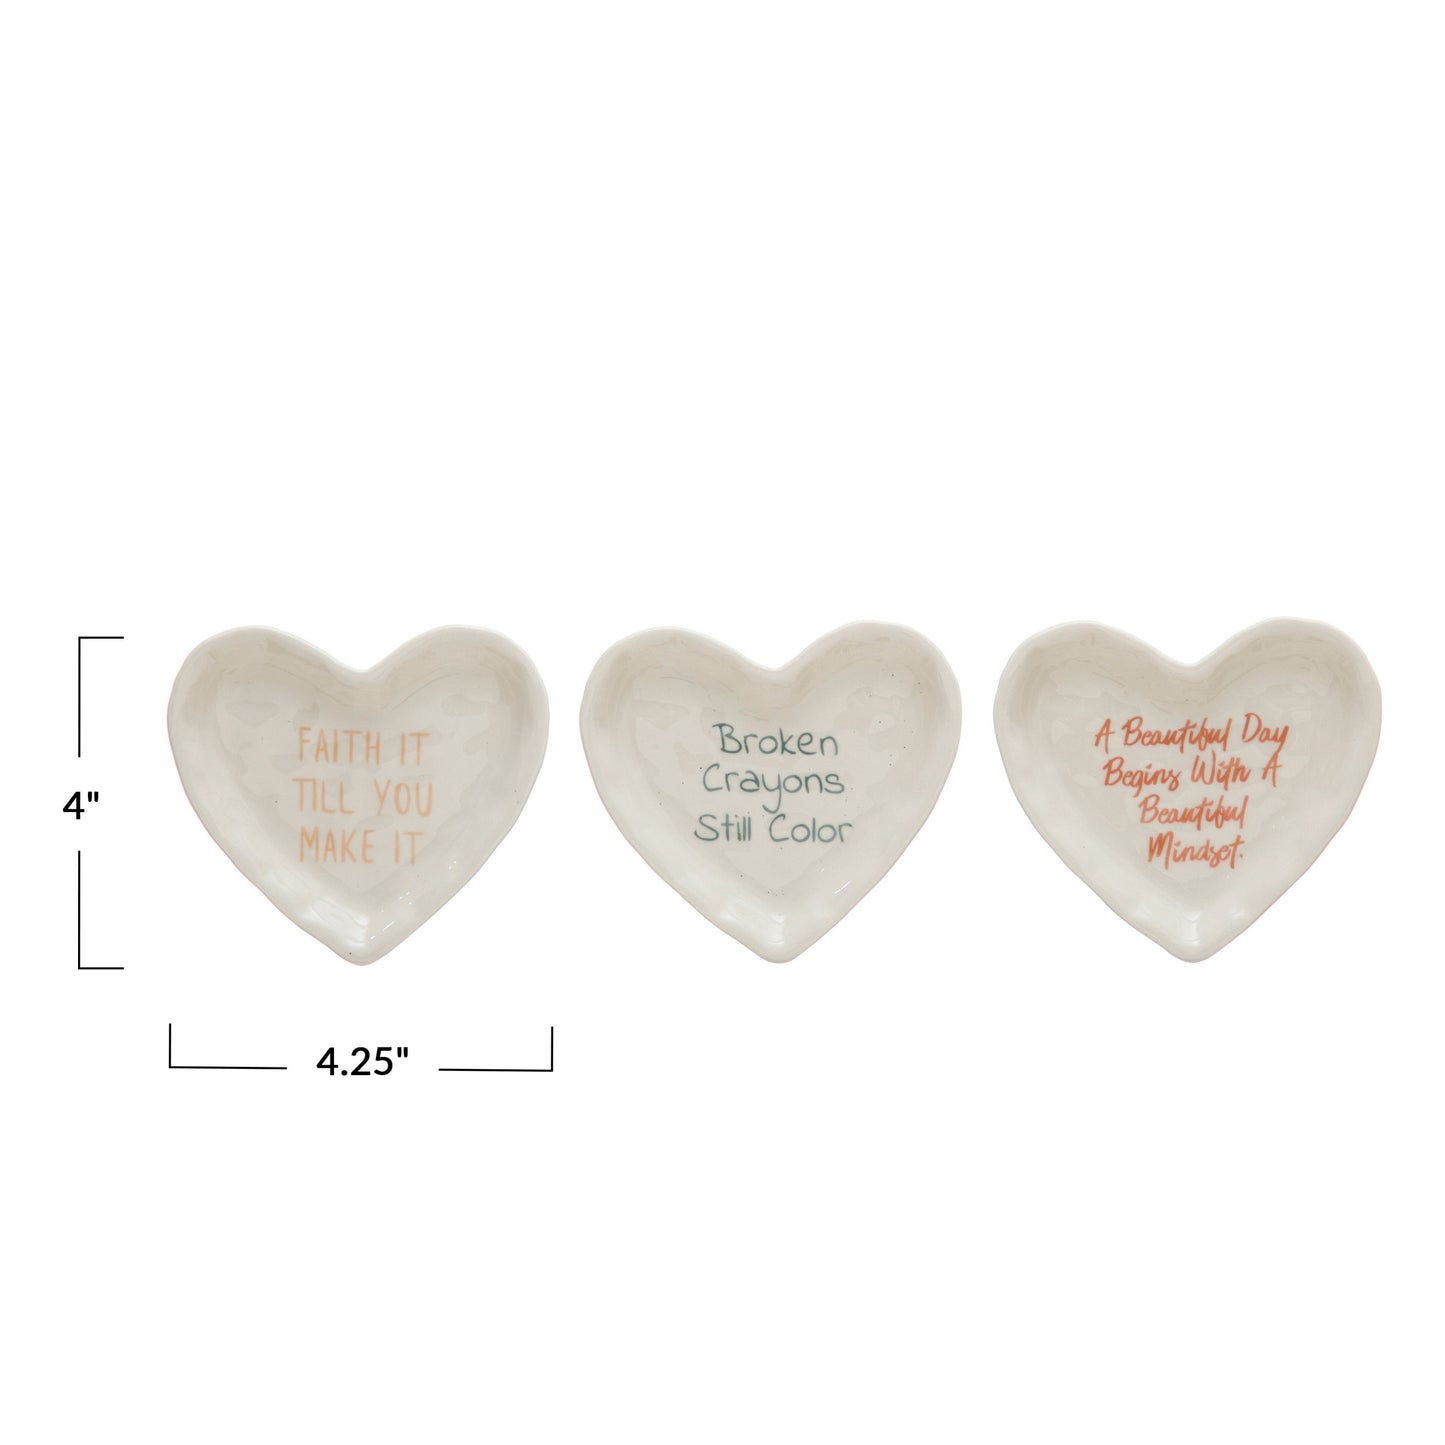 Heart Shaped Dish with Saying, 3 Styles